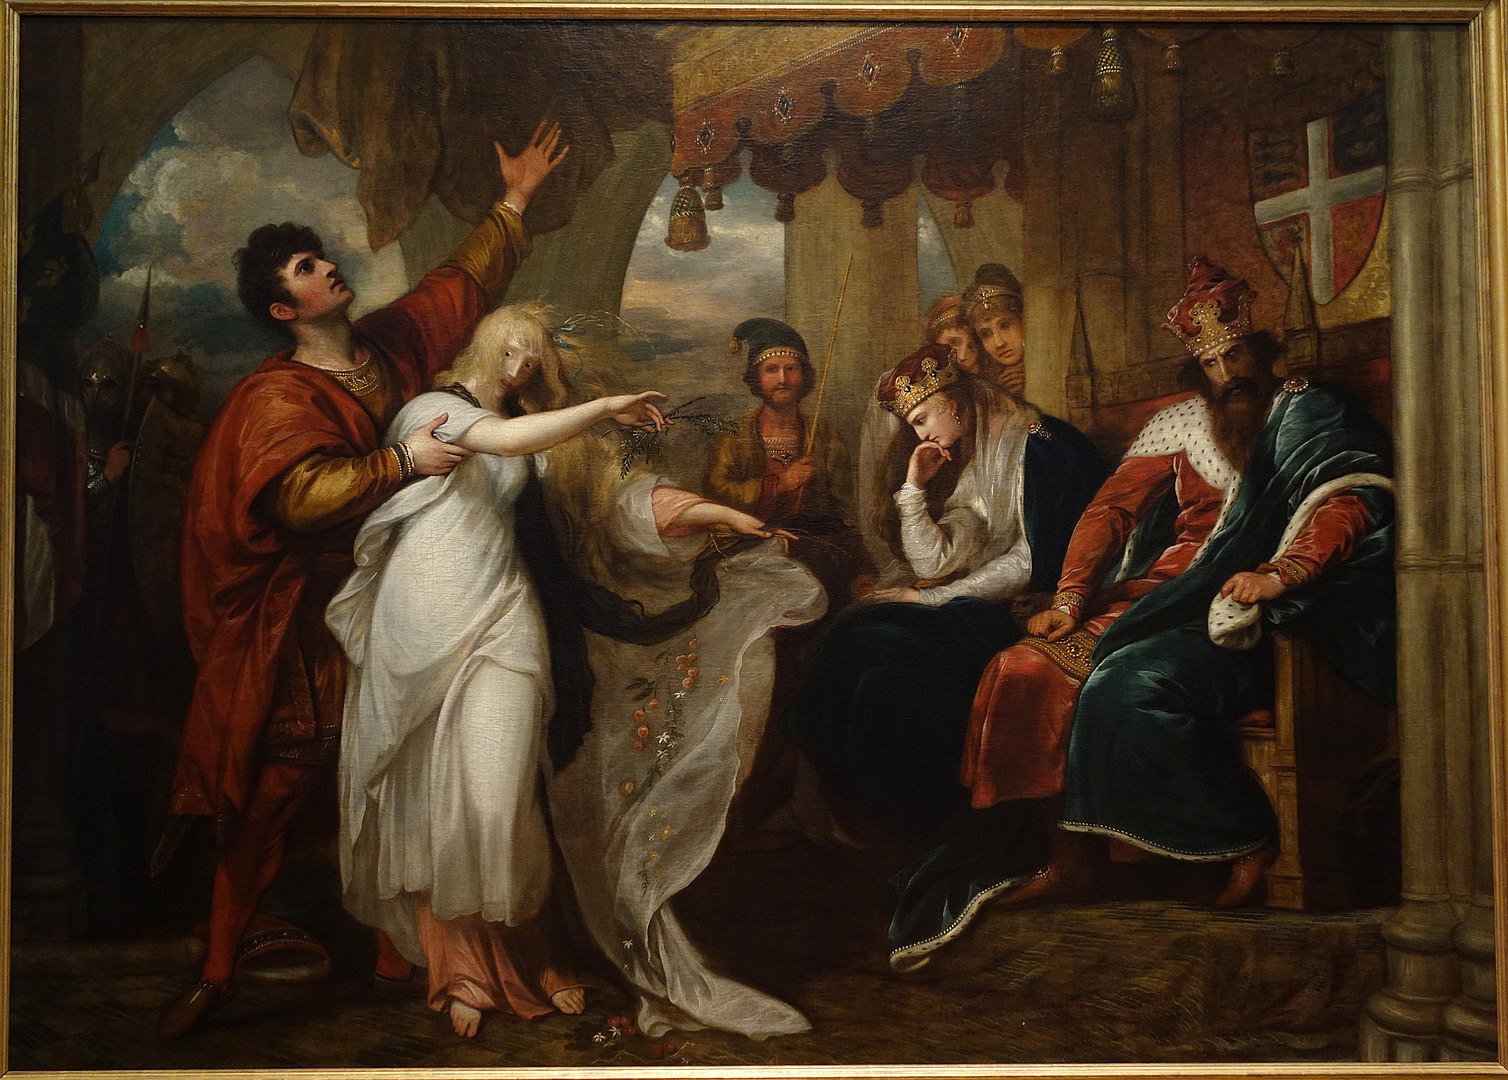 A man carries a young woman who dances while the couple are surrounded by a room of royal figures.